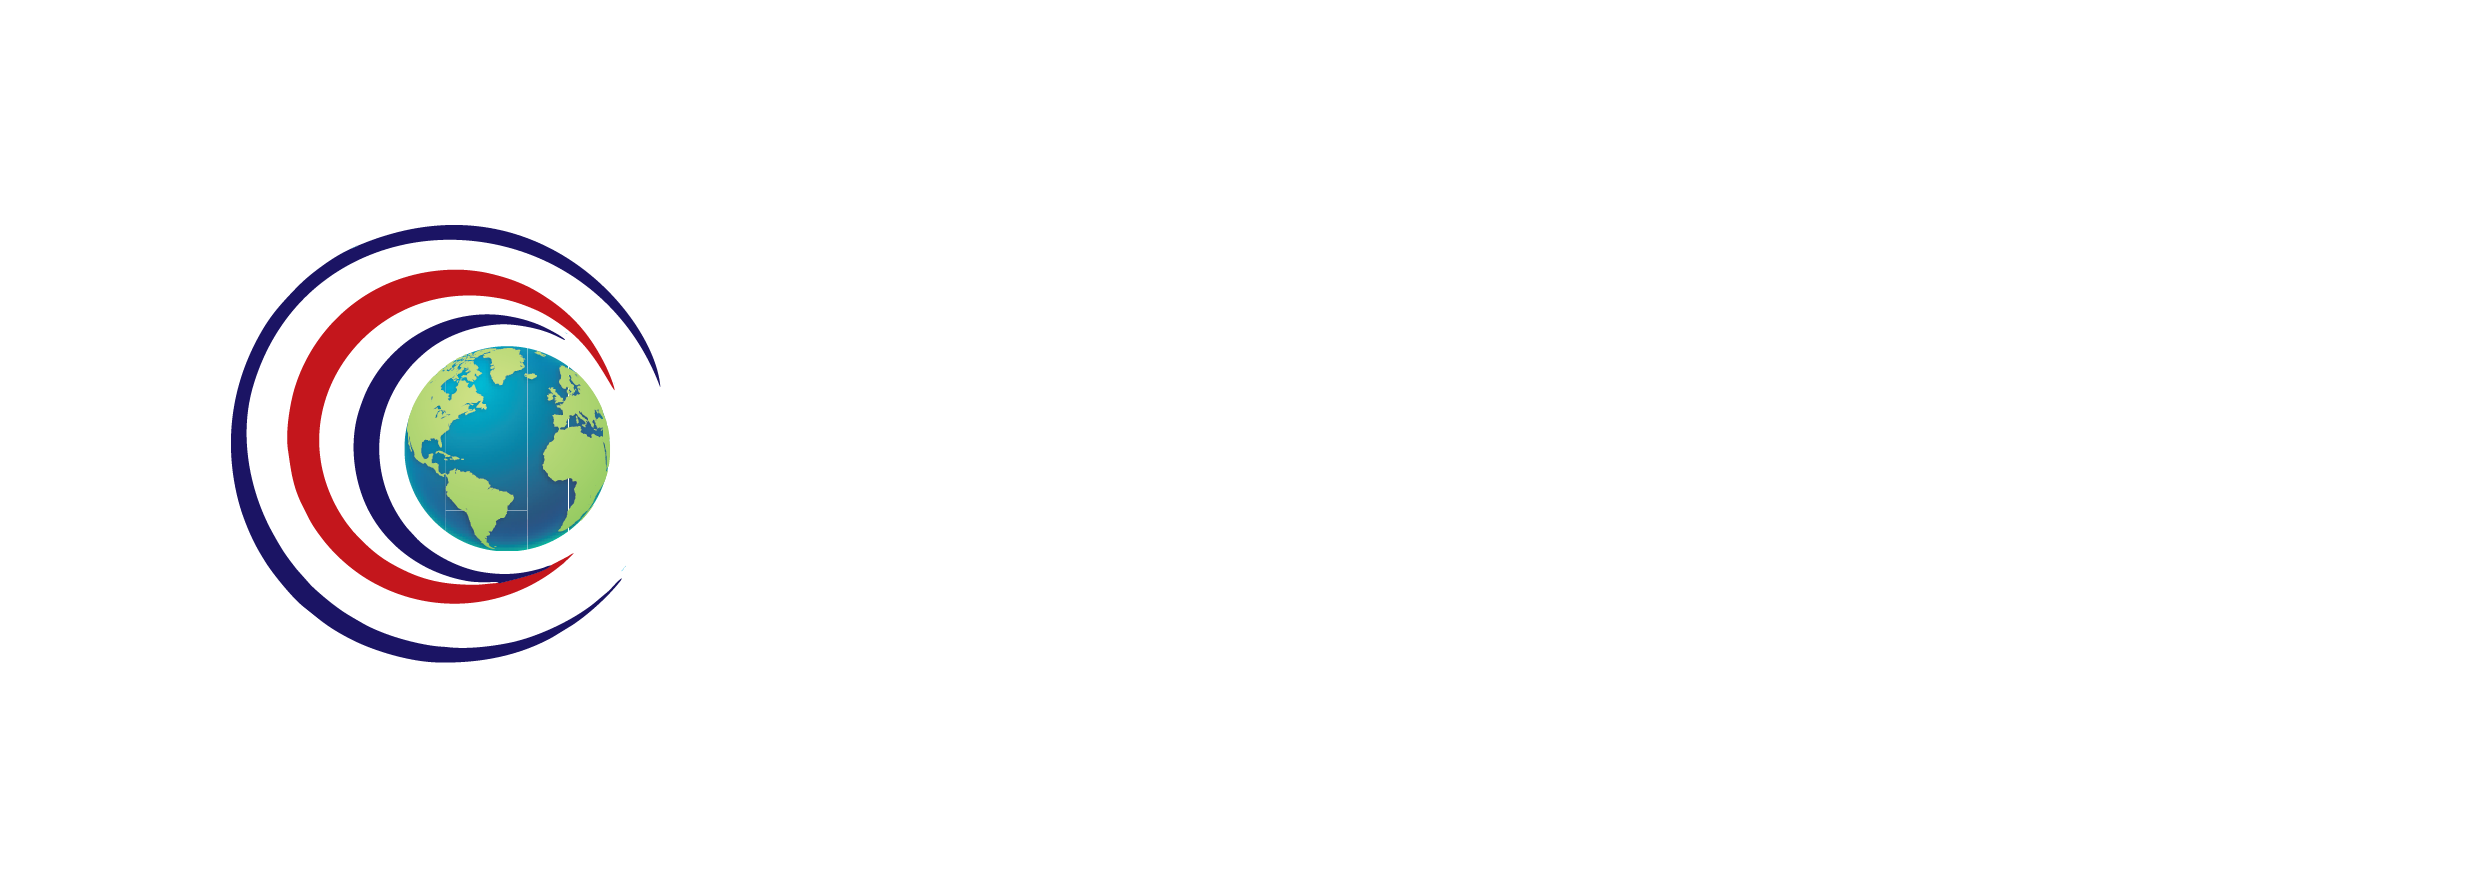 Global Pathway College